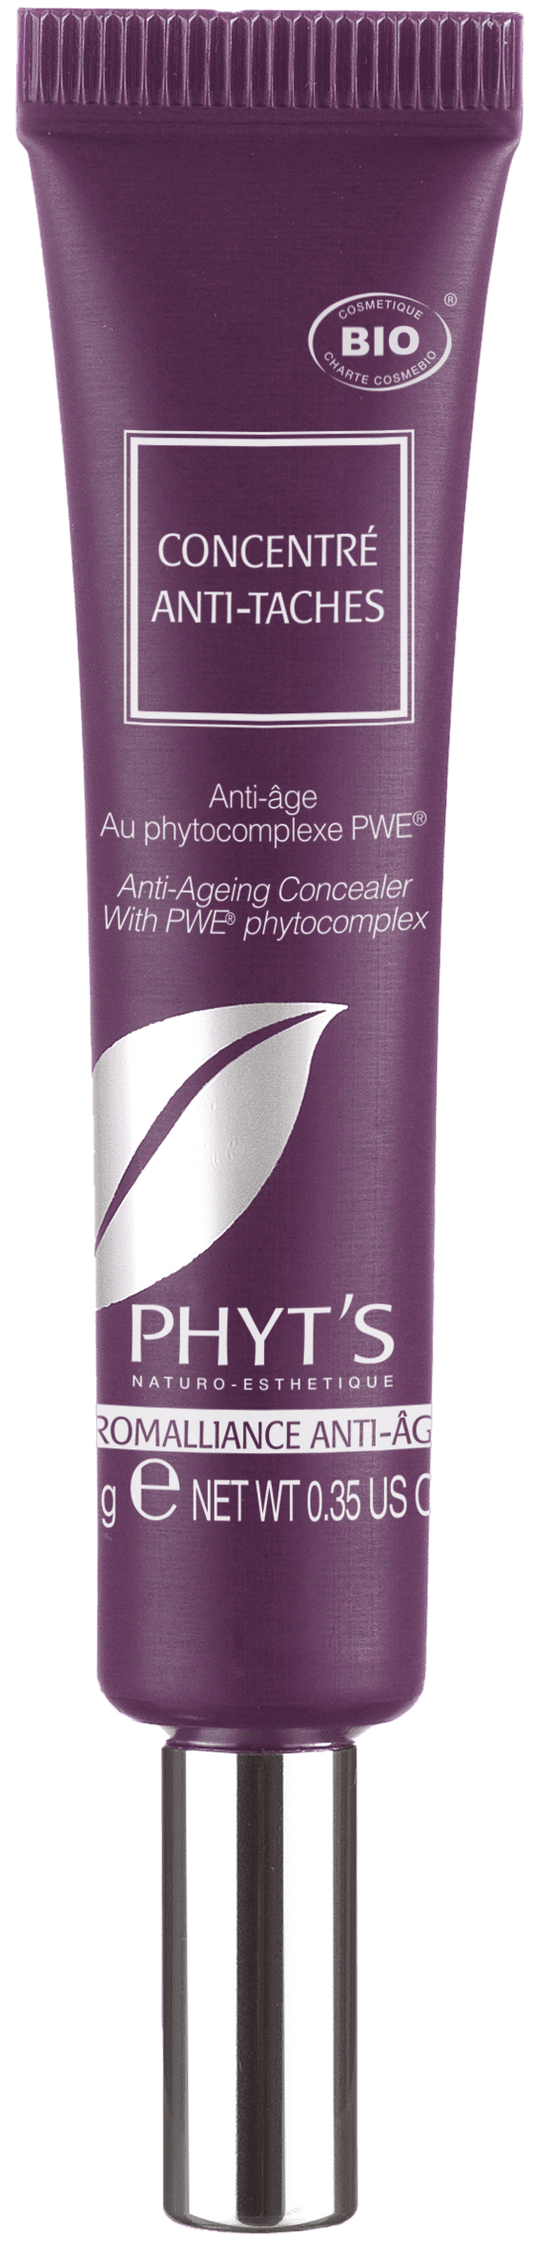 PHYT'S AROMALIANCE Concentrate Anti Taches/ dark spots 15g